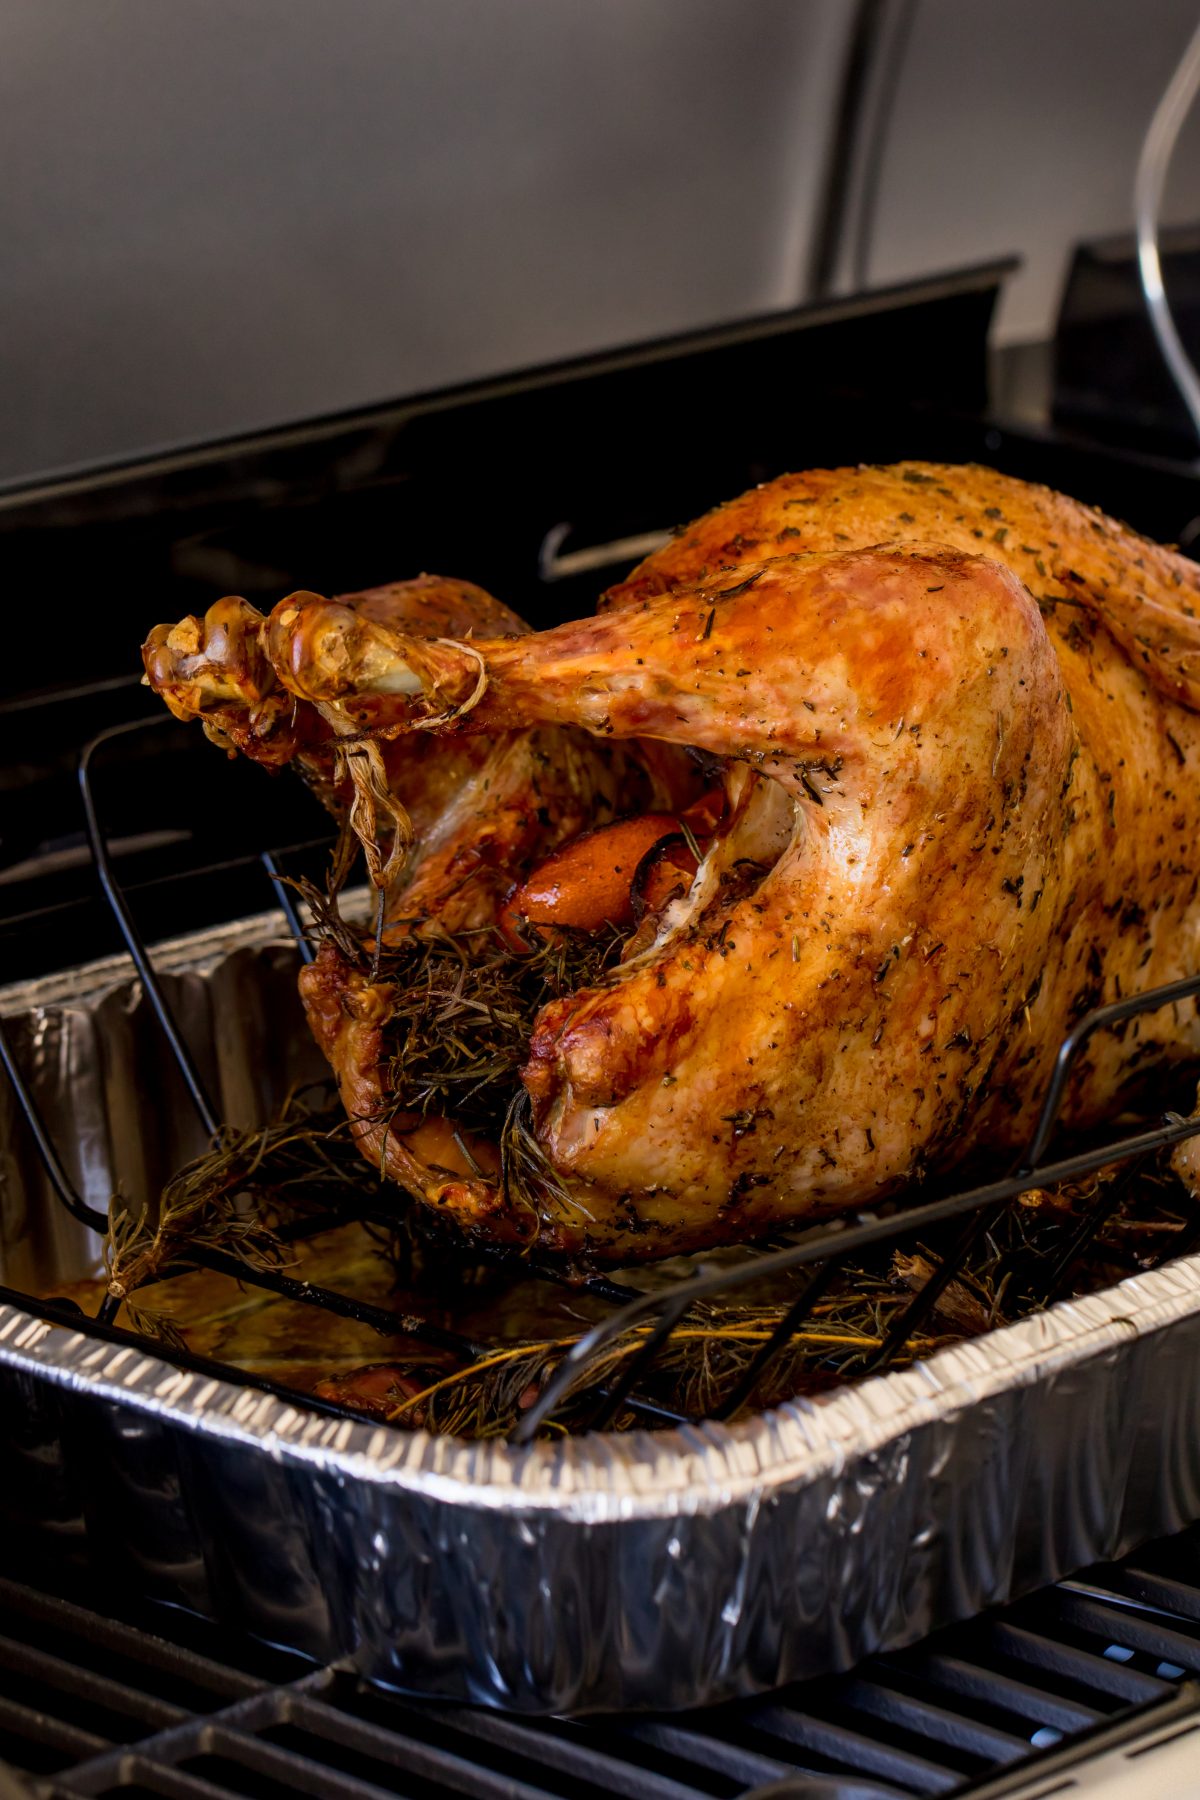 Cook the turkey until it is completely crispy and brown.